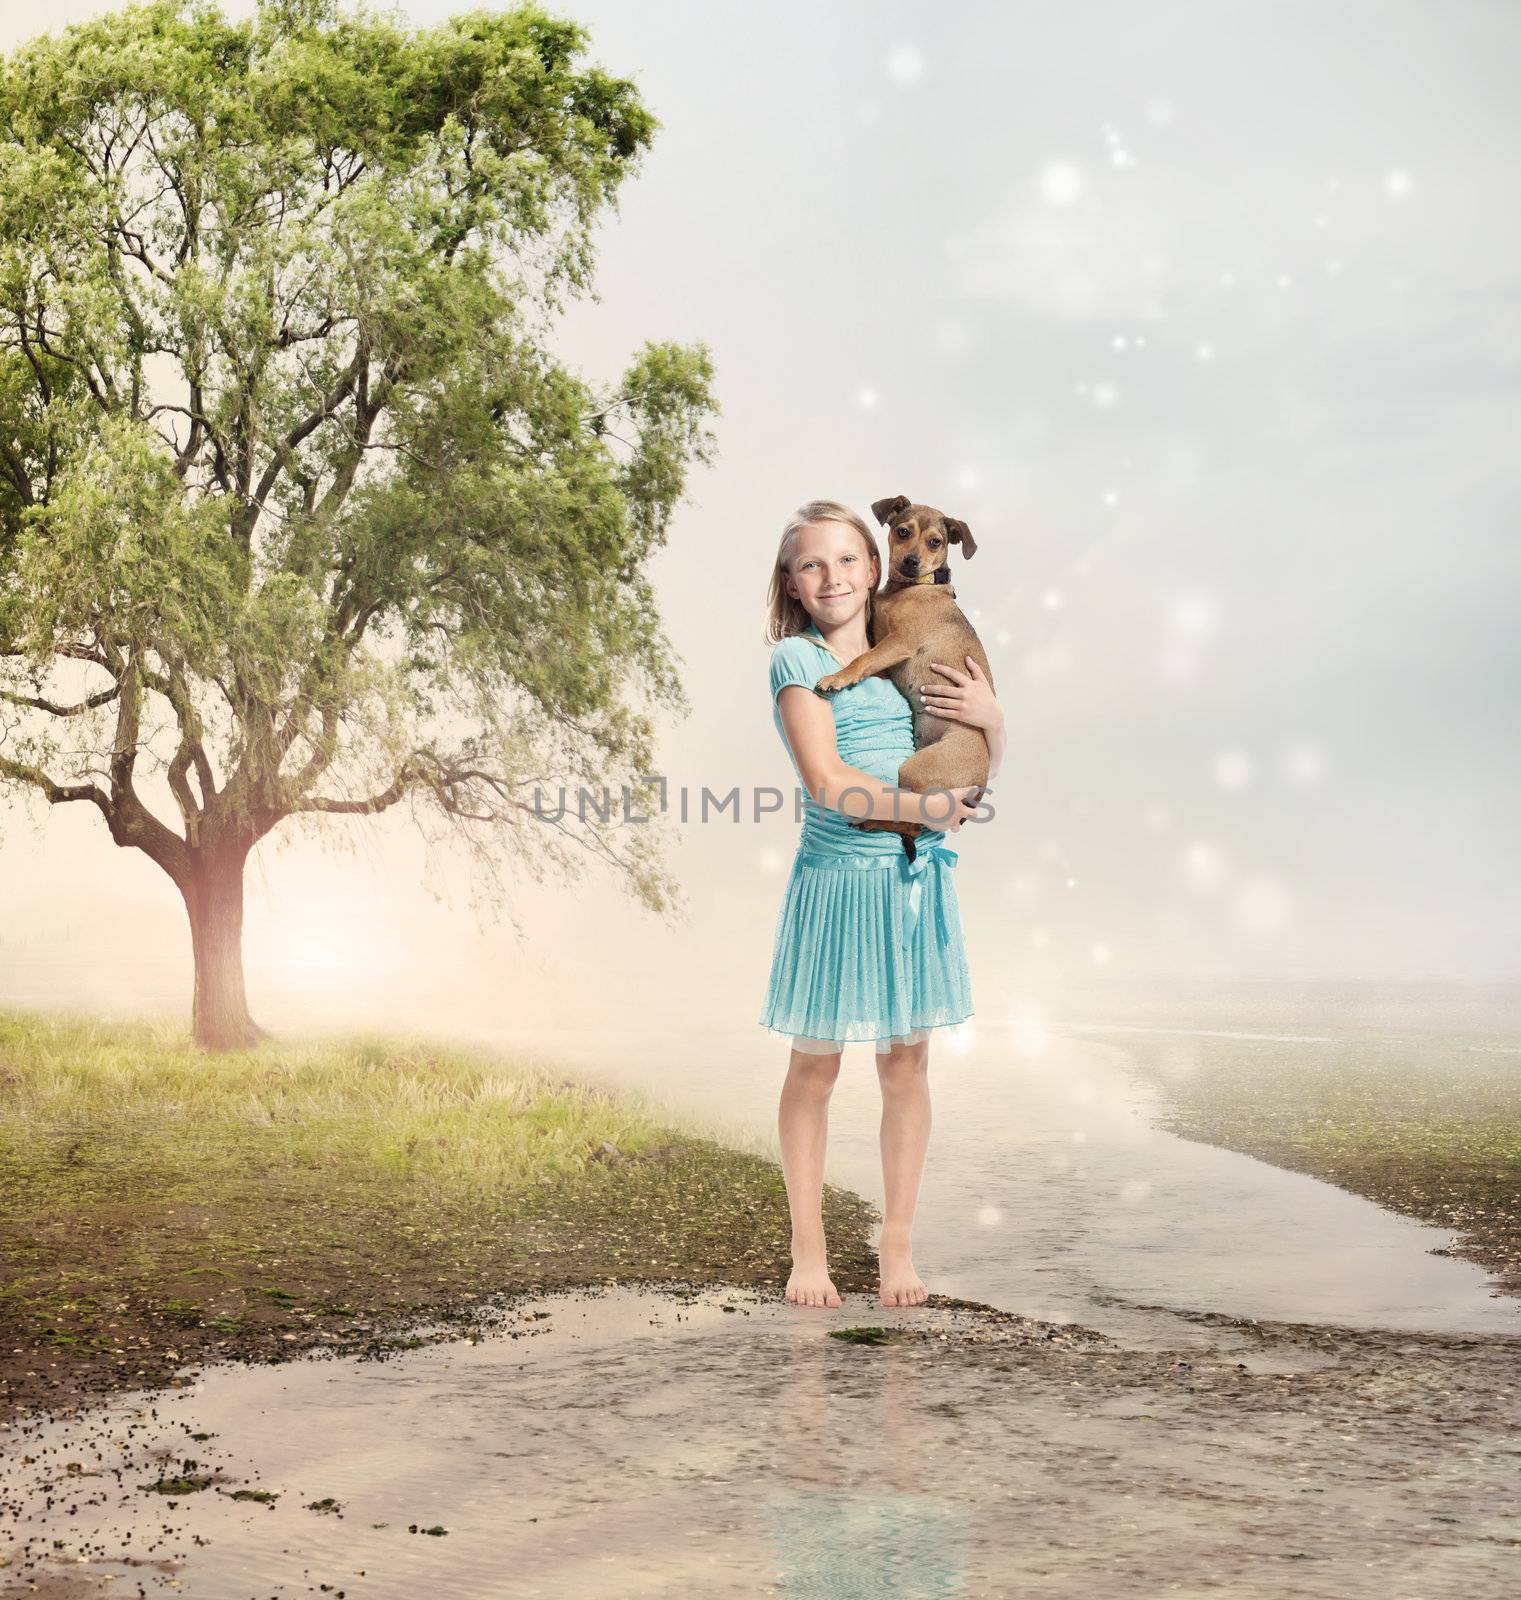 Girl Holding her Puppy at a Magical Brook by melpomene